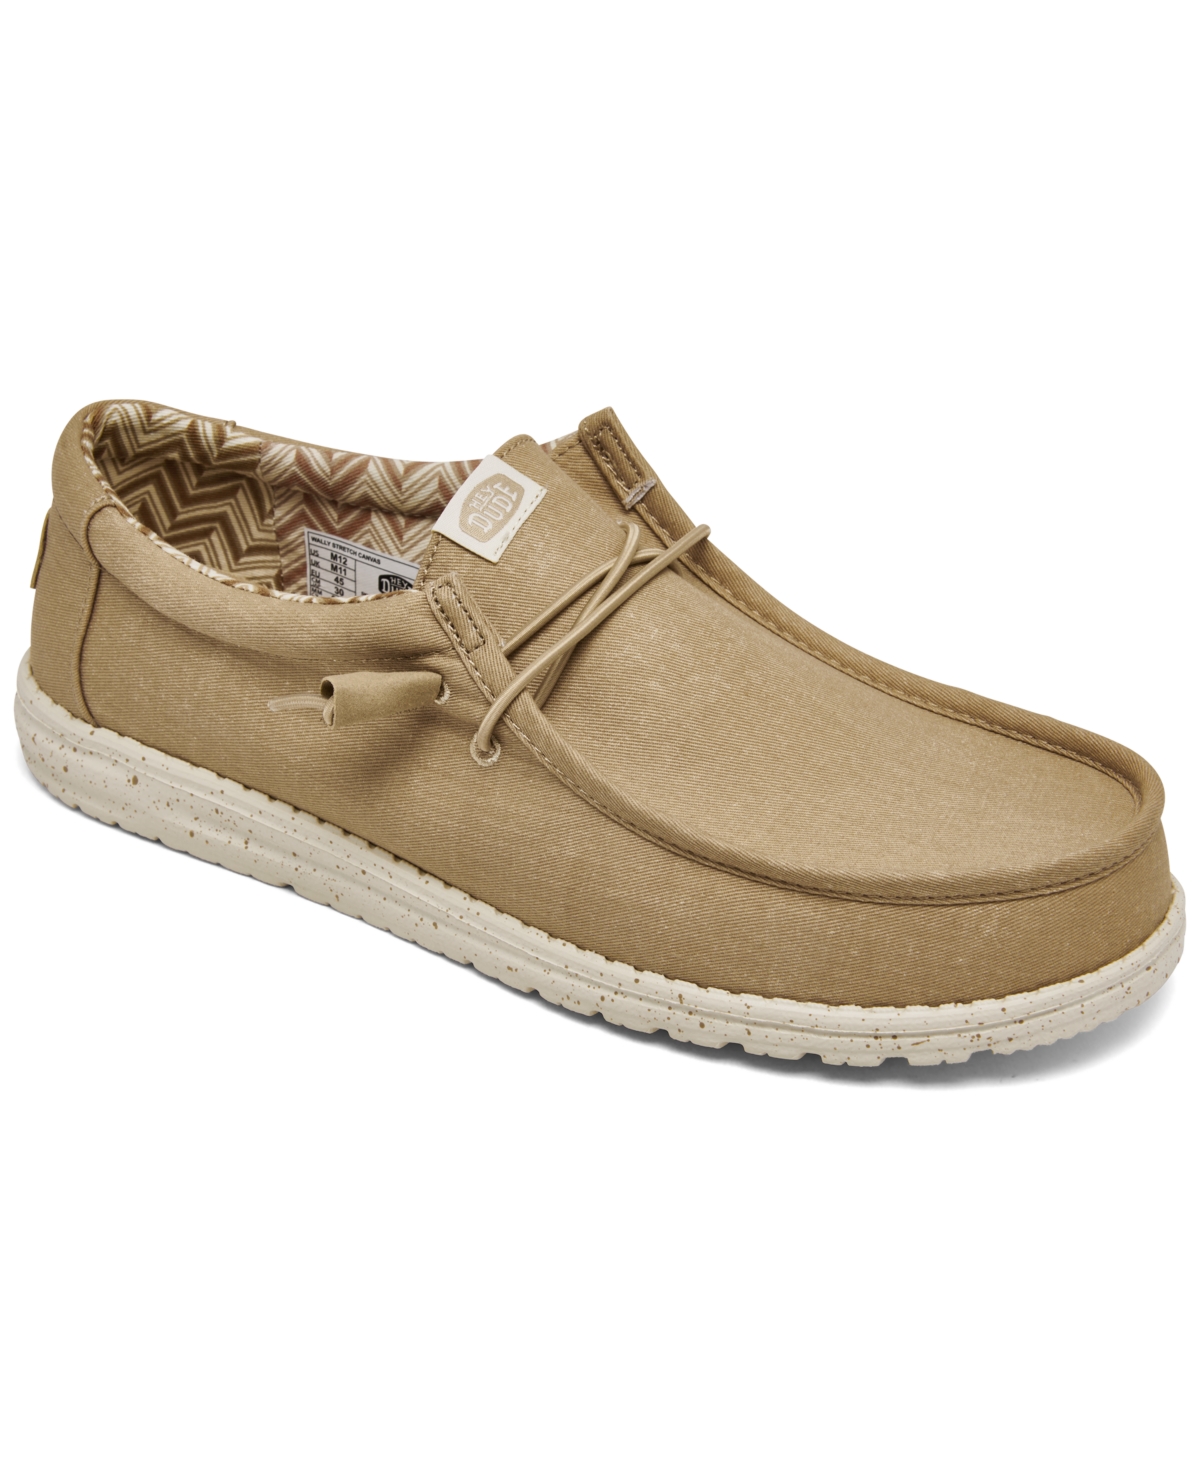 Hey Dude Men's Wally Canvas Casual Moccasin Sneakers From Finish Line In Tan Khaki